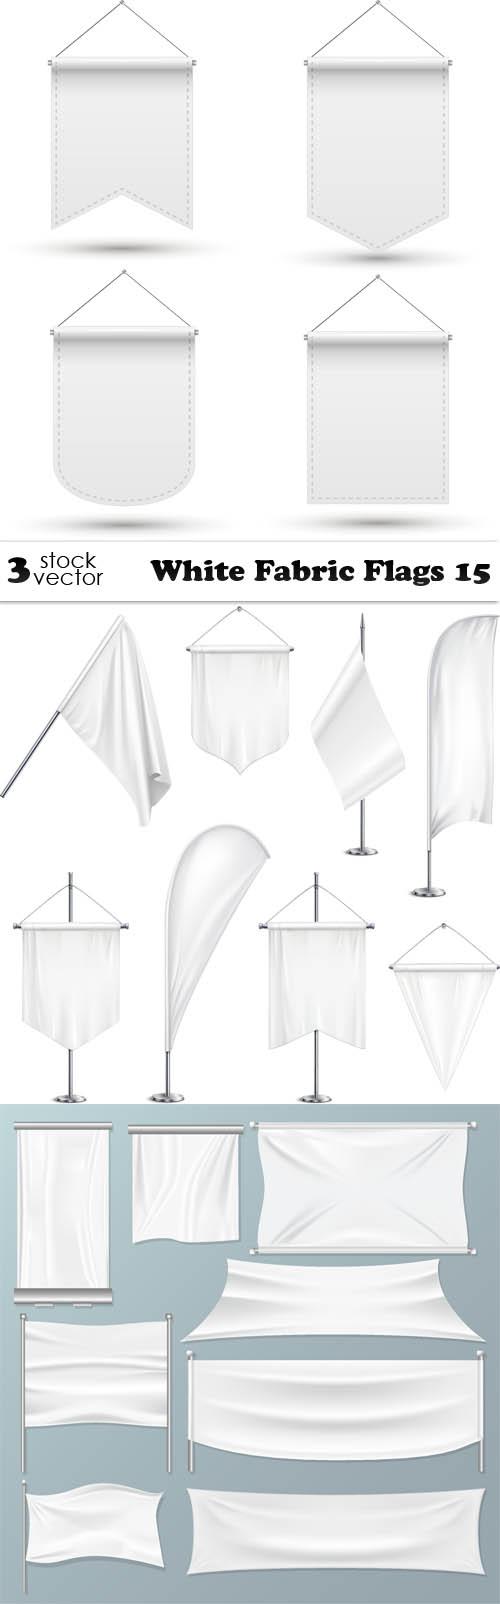 White Fabric Flags 15